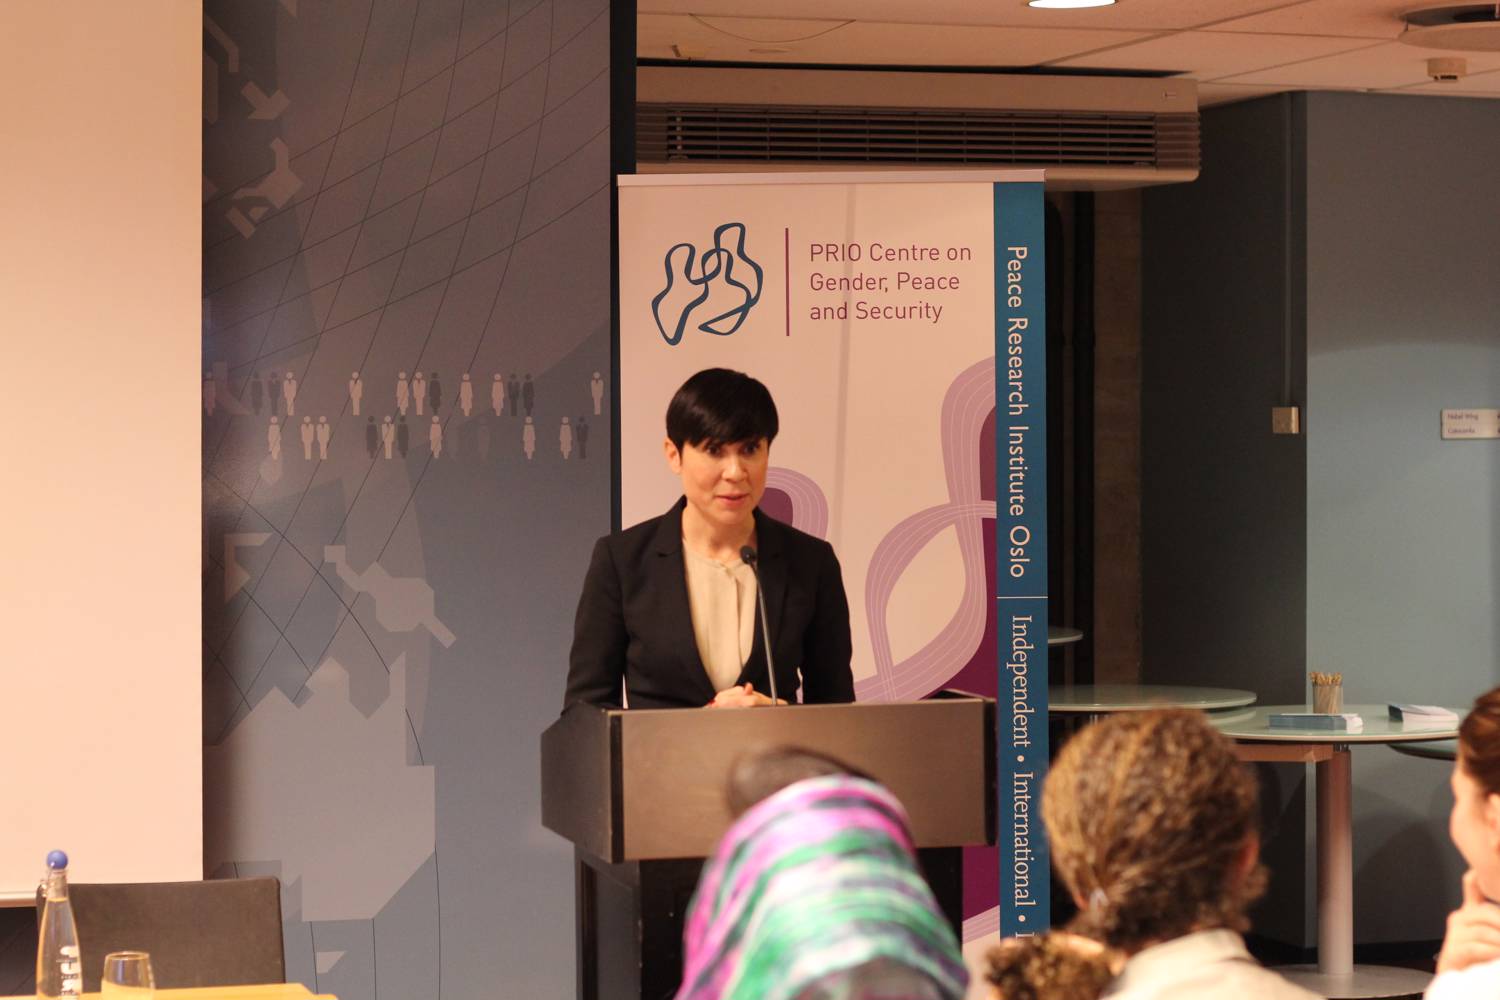 Norwegian Minister of Foreign Affairs Ine Eriksen Søreide addressing the audience at the launch of the Women, Peace and Security Index at PRIO. PRIO/Iver Kleiven